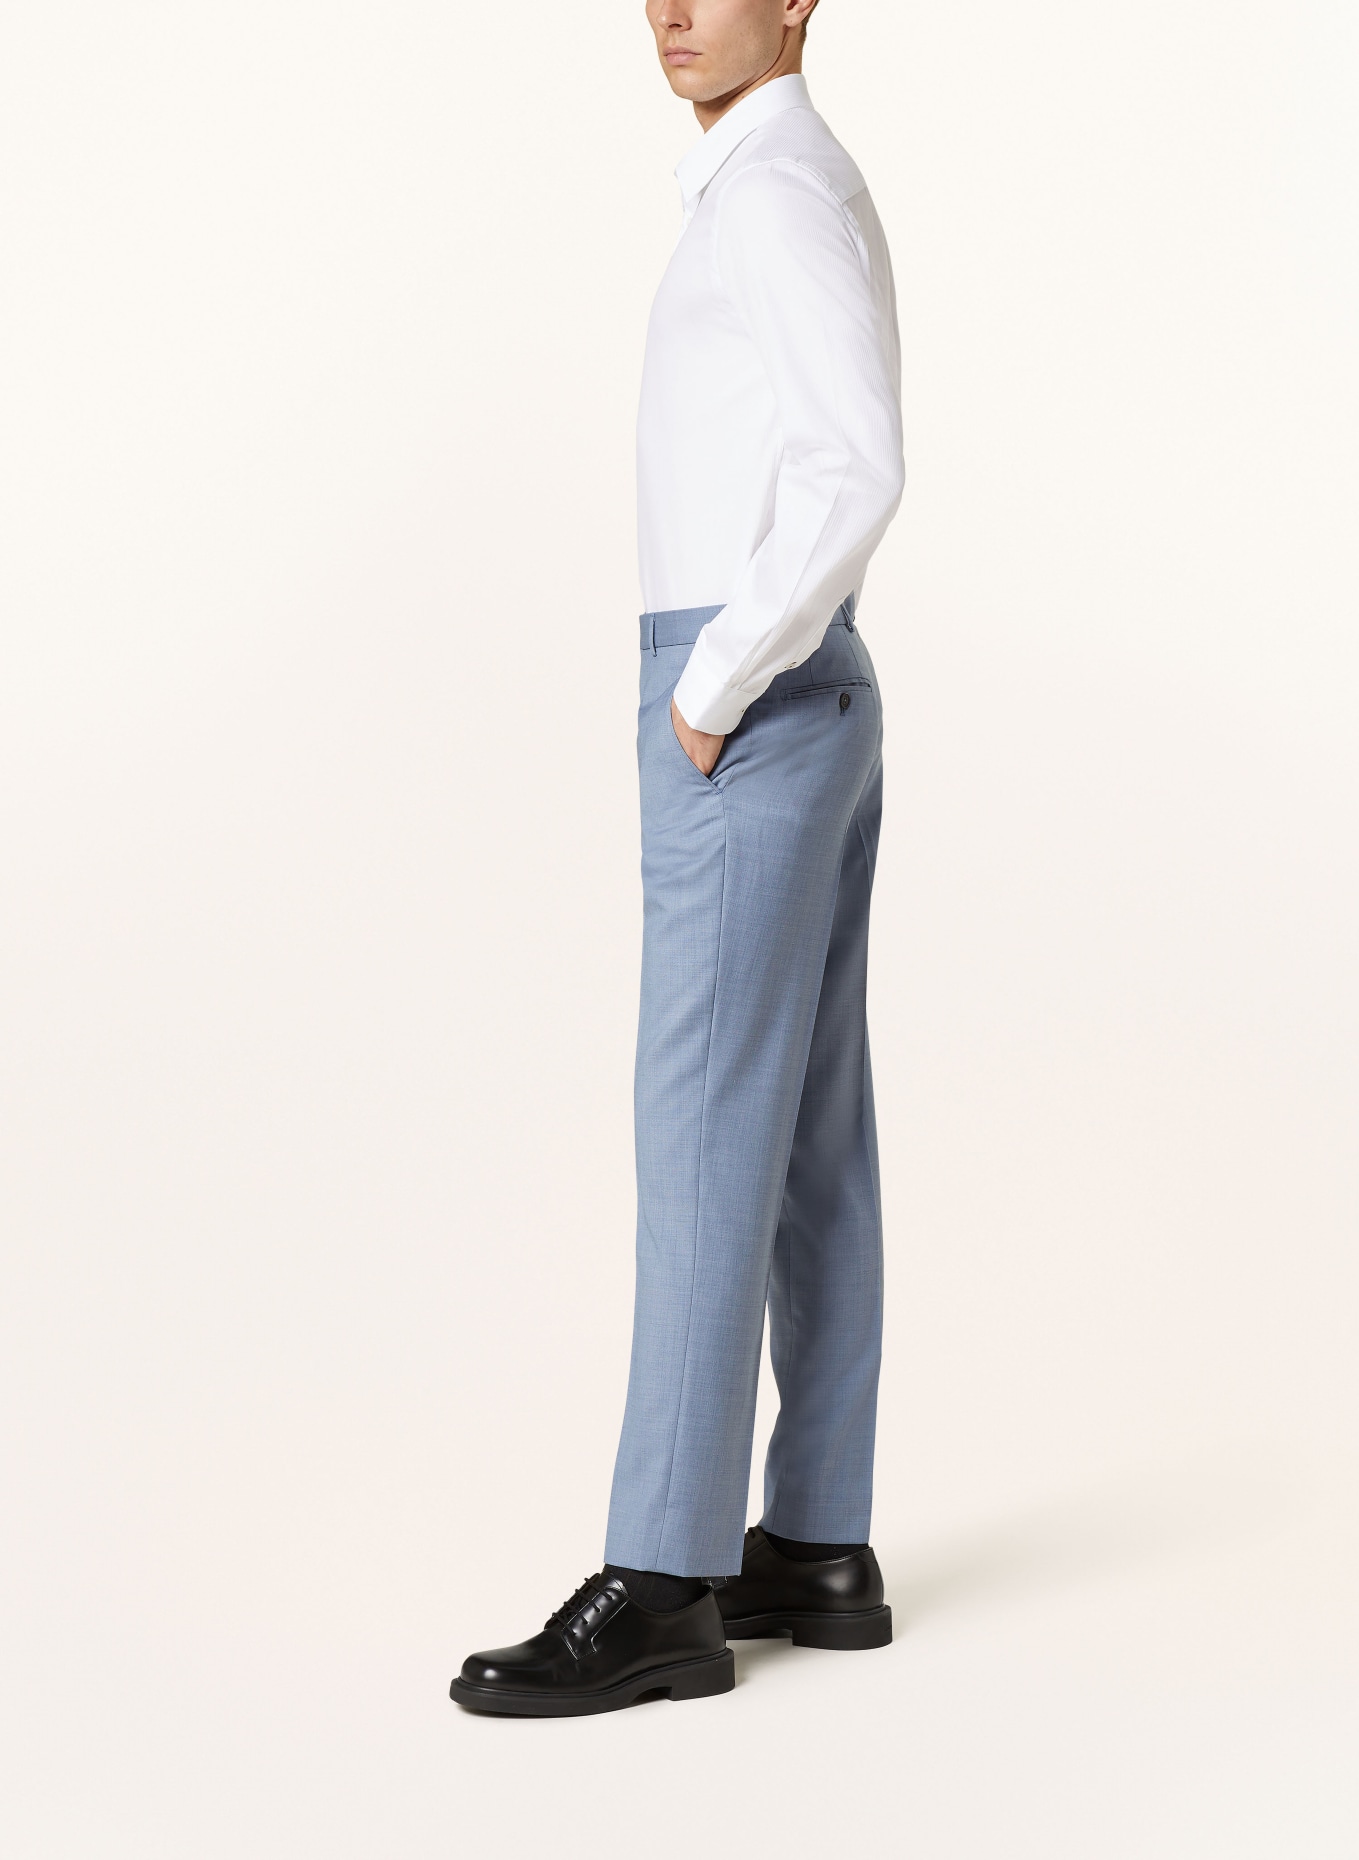 TED BAKER Anzughose ORIONT Slim Fit, Farbe: BLUE BLUE (Bild 5)